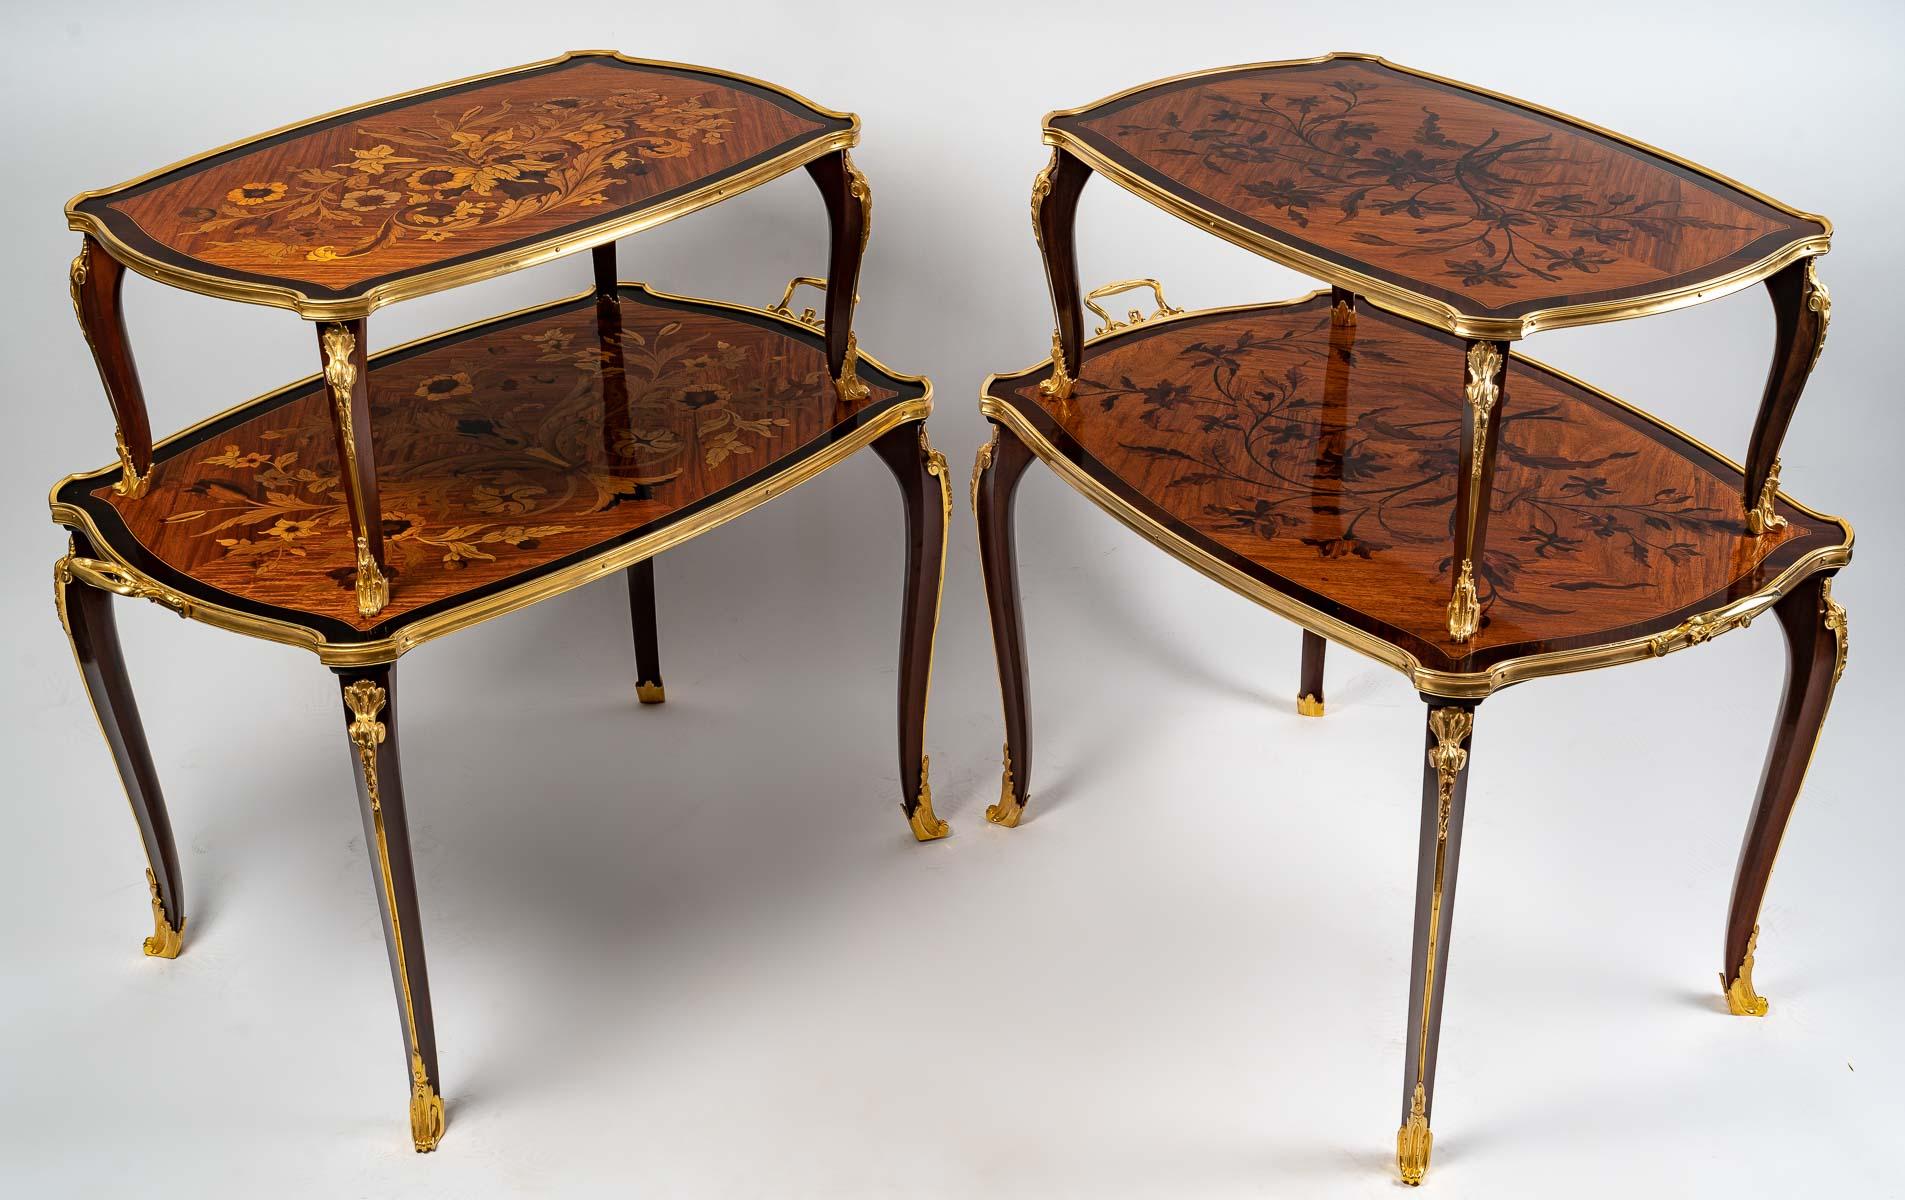 Pair of 19th century Tea Tables, Napoleon III period

Nice pair of tables, end of sofa of the XIXth century, Napoleon III period in rosewood marquetry.

Dimensions: H: 82cm, W: 83cm, D: 56cm.